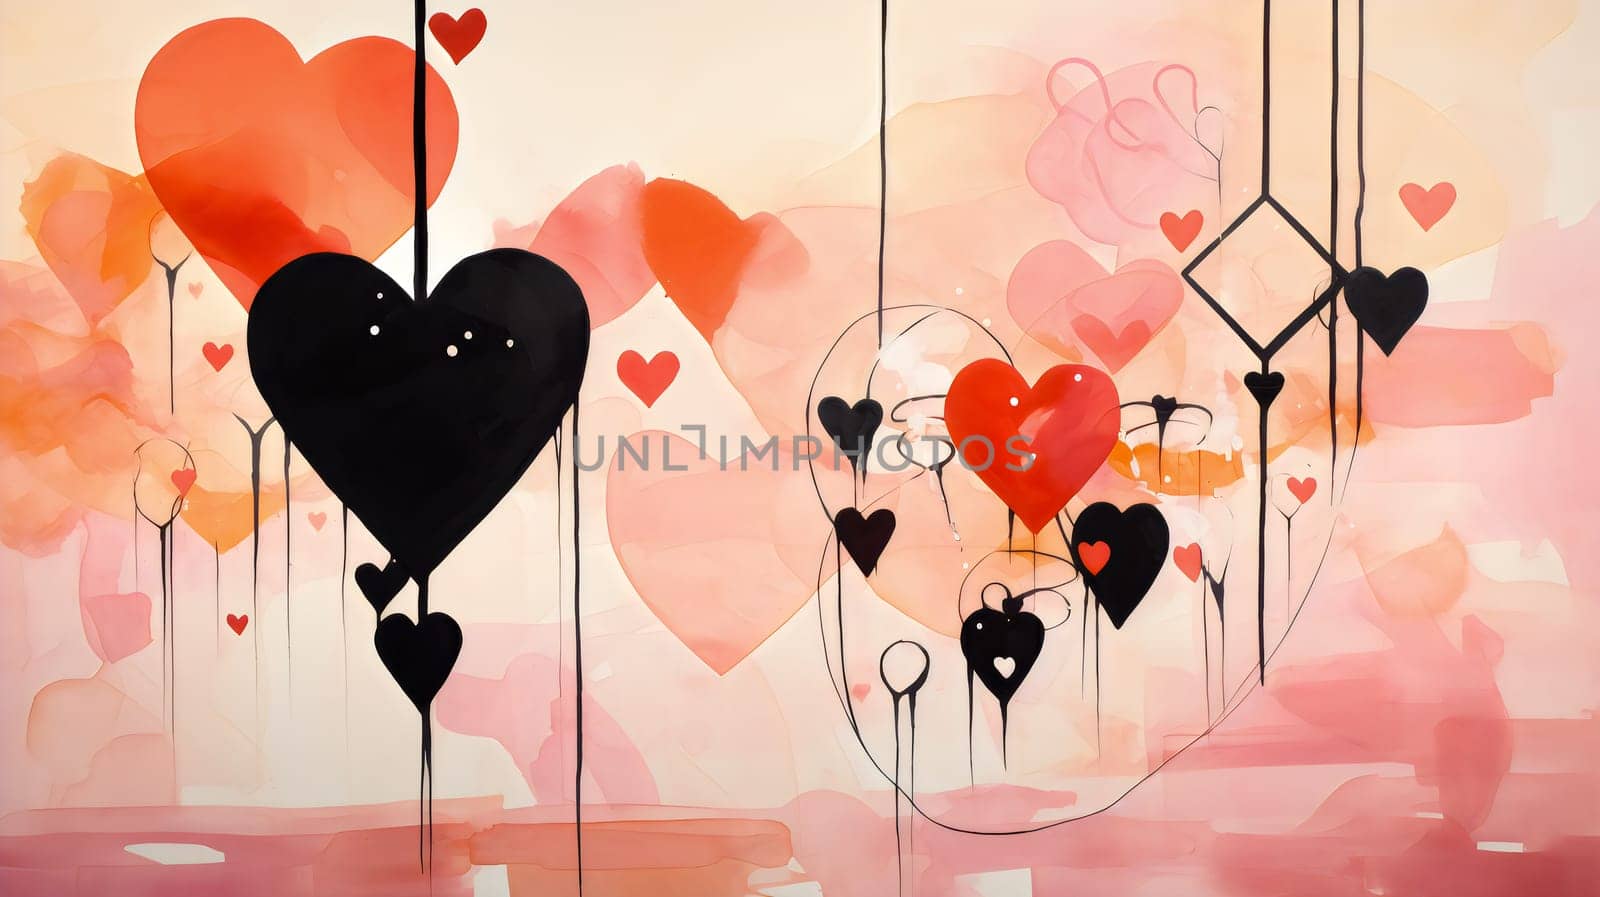 Artful hearts in a blend of red and pink hues create a whimsical valentine scene by chrisroll